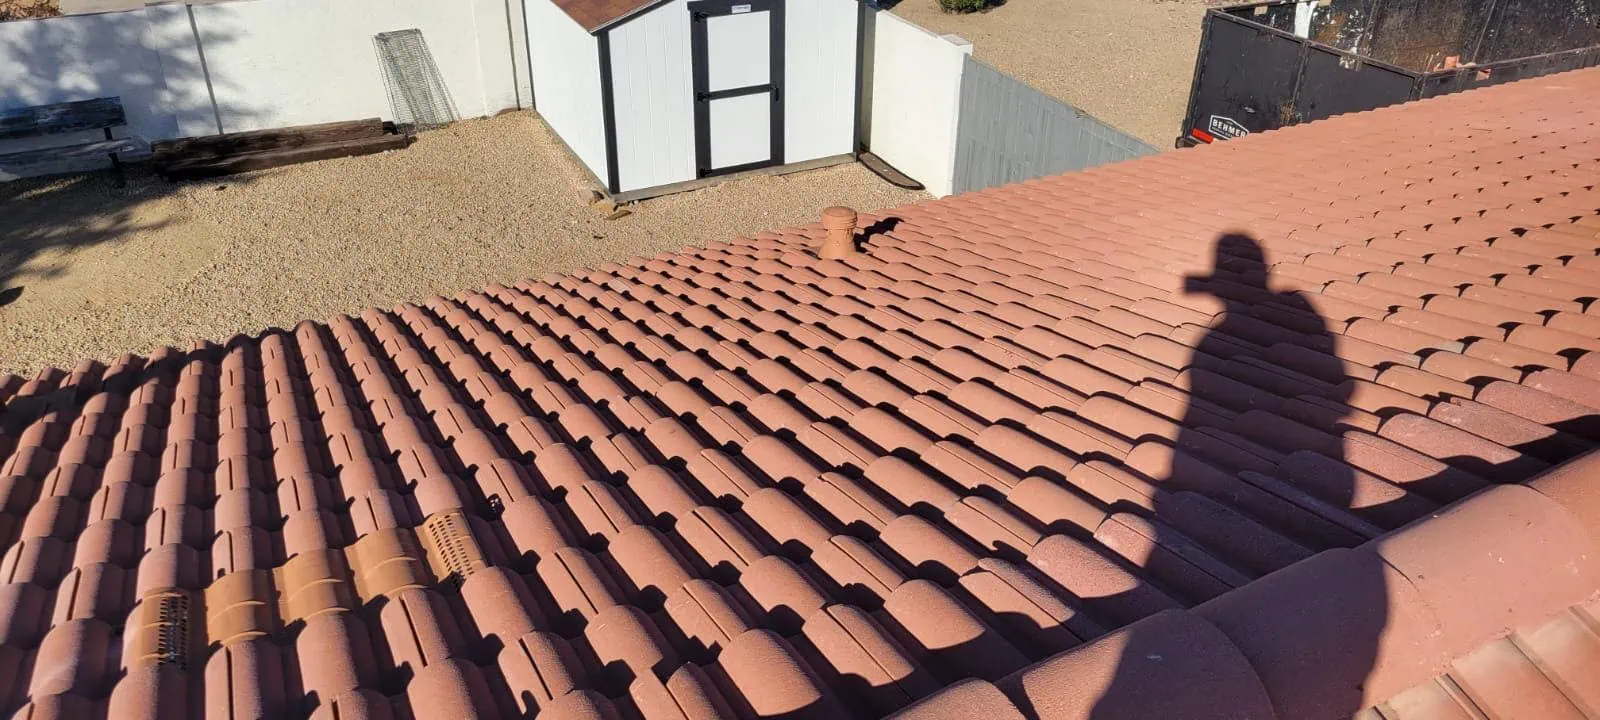 tile roof repair in chandler az by behmer roofing company